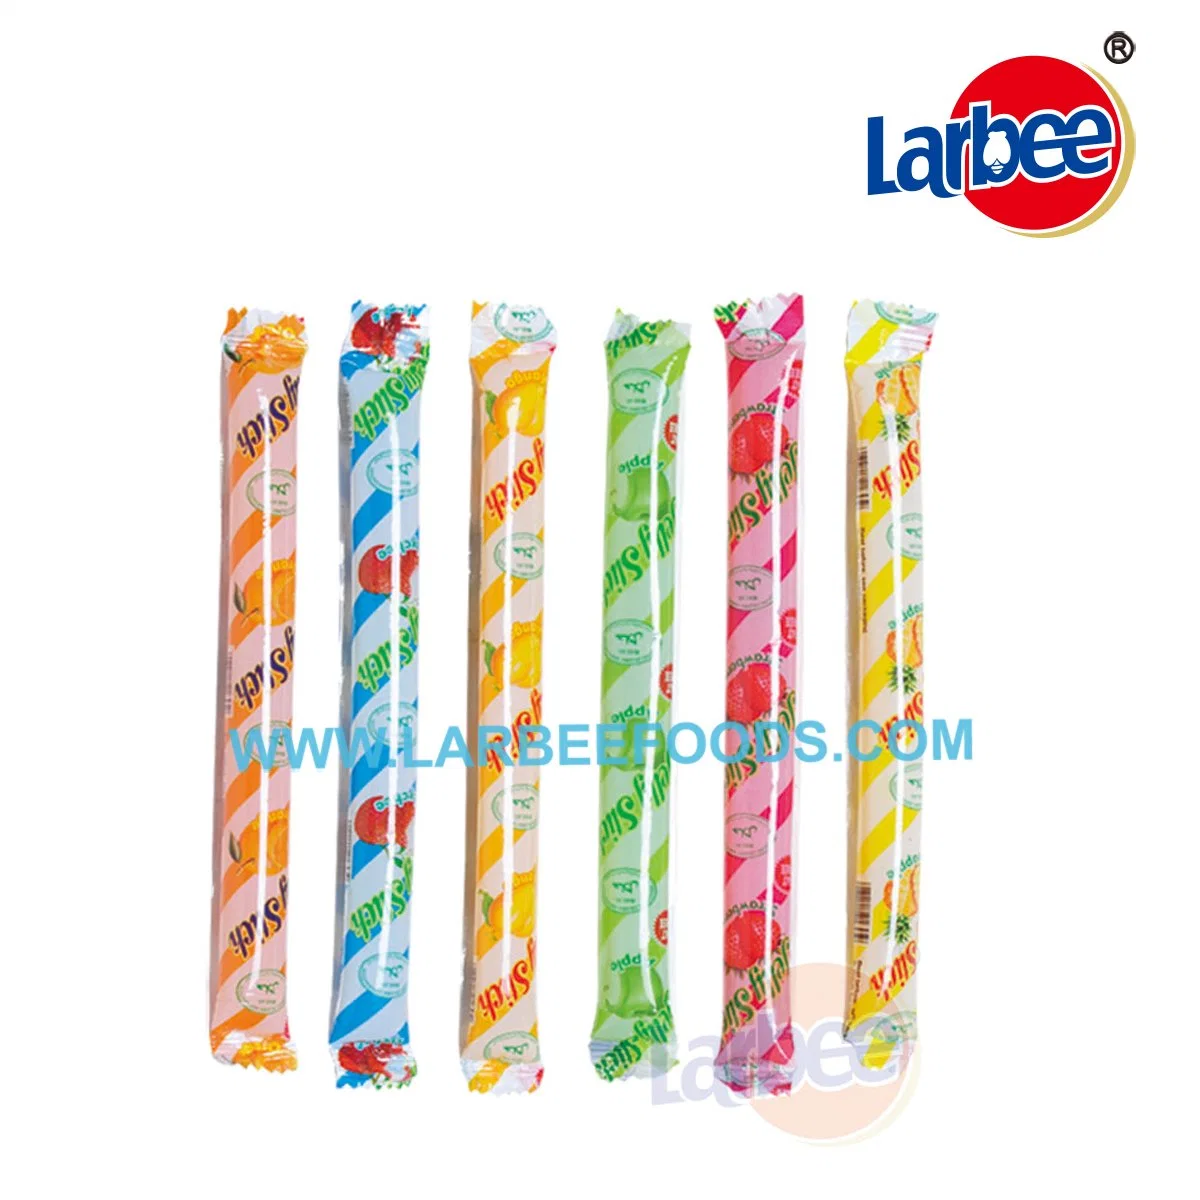 Halal Food 45g Jelly Stick Fruit Jelly from Larbee Candy